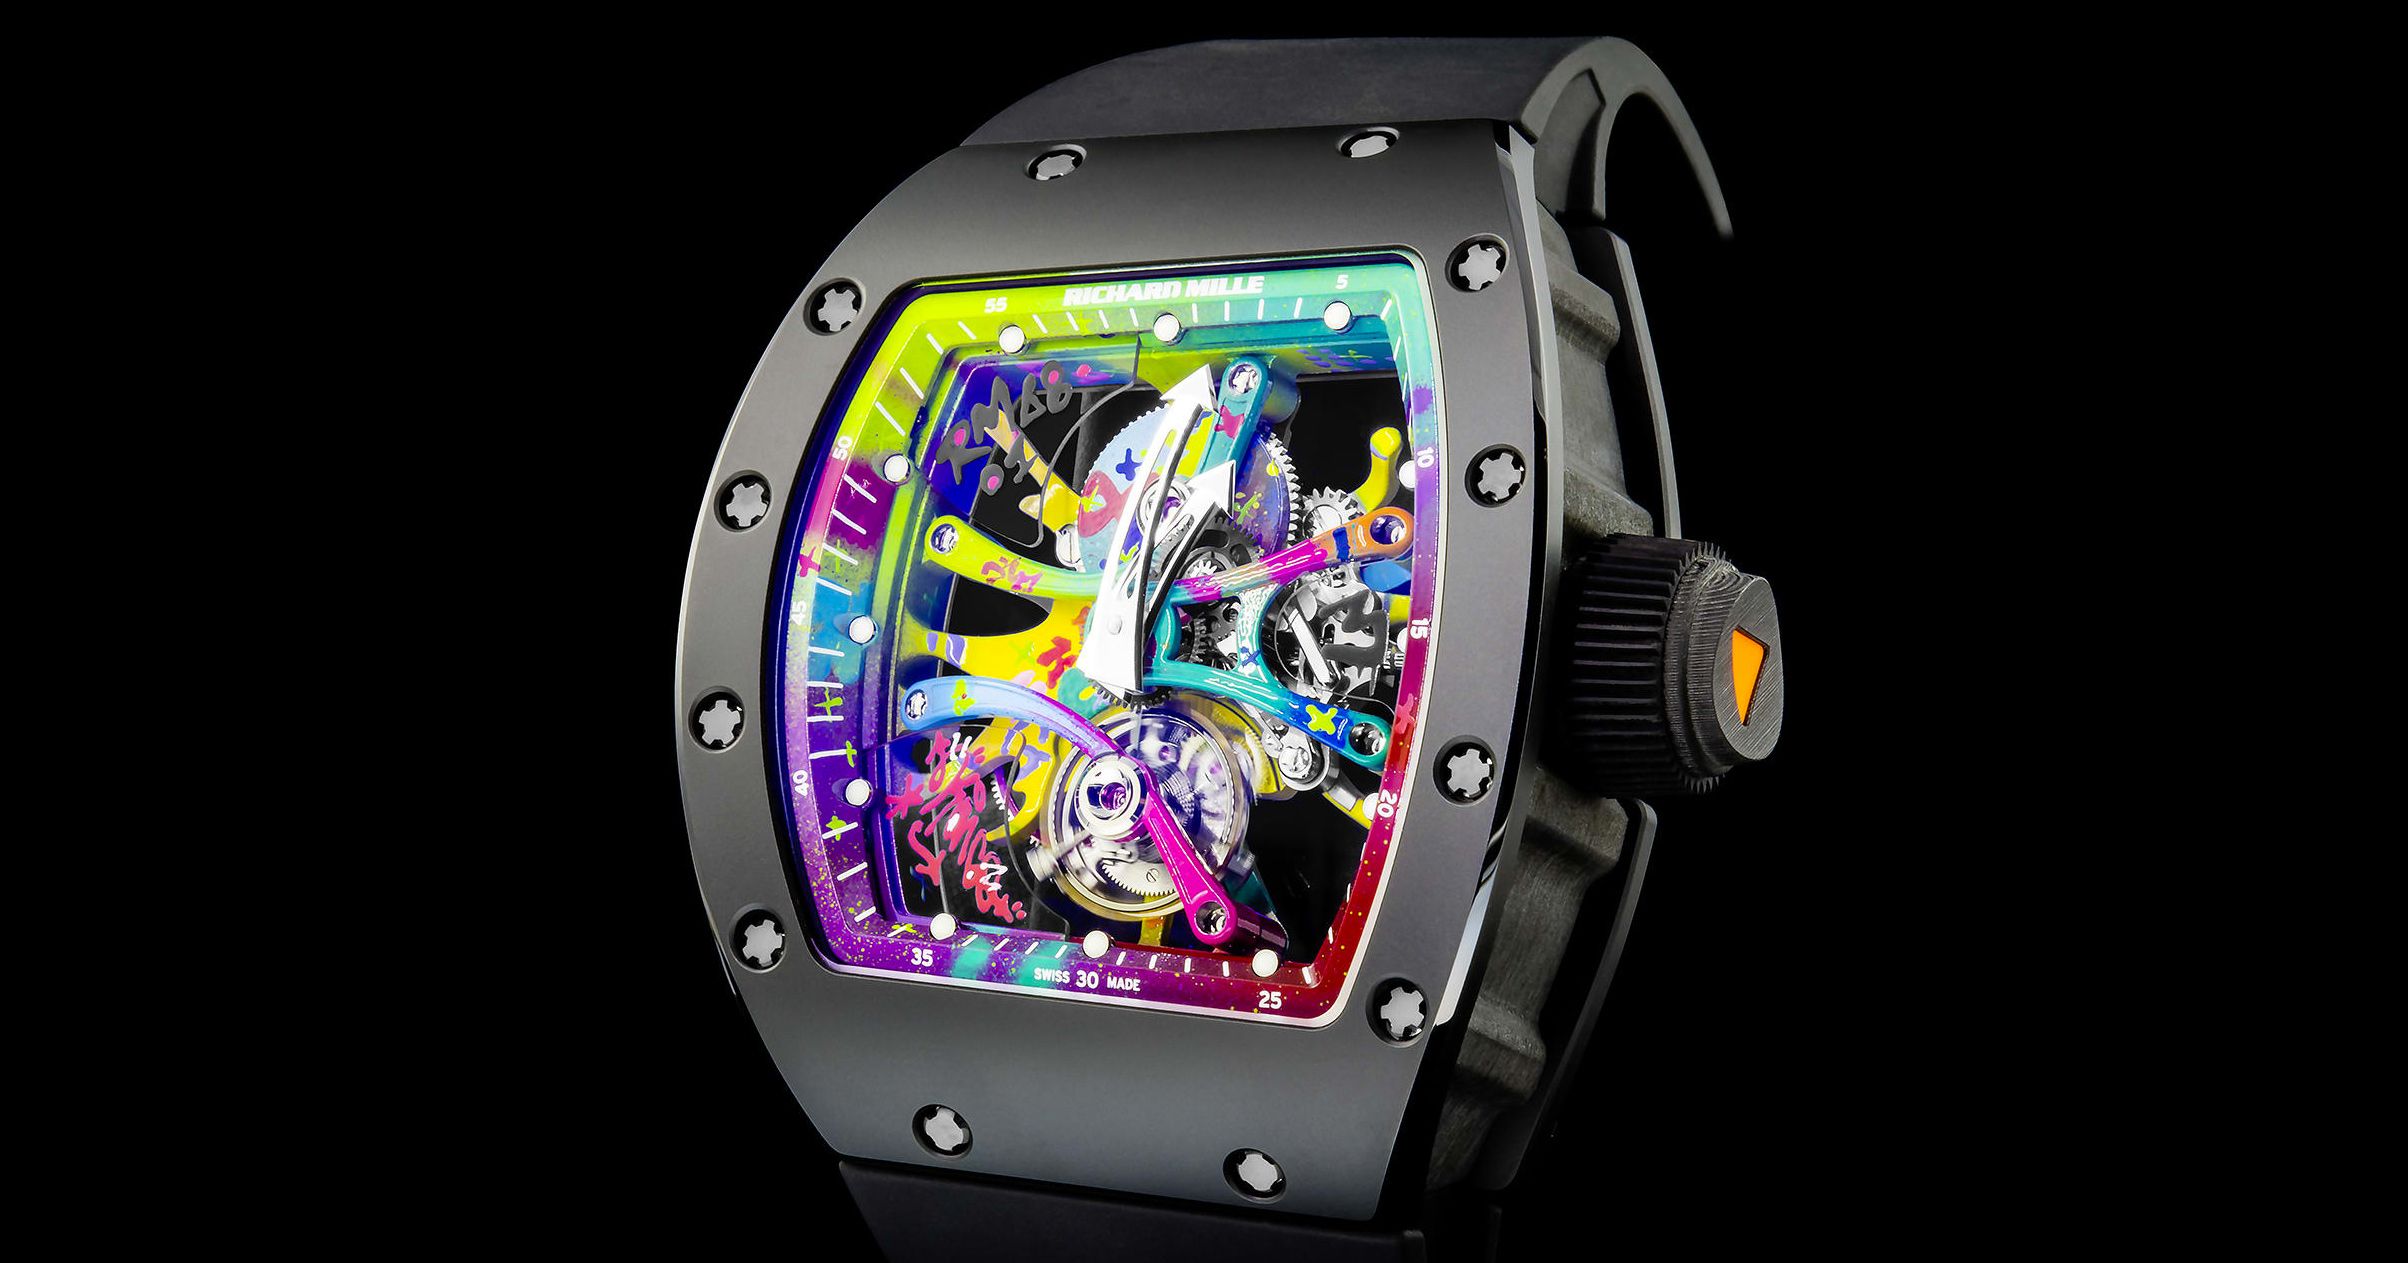 Richard Mille Midnight Fire Automatic Winding Flyback Chronograph RM 11